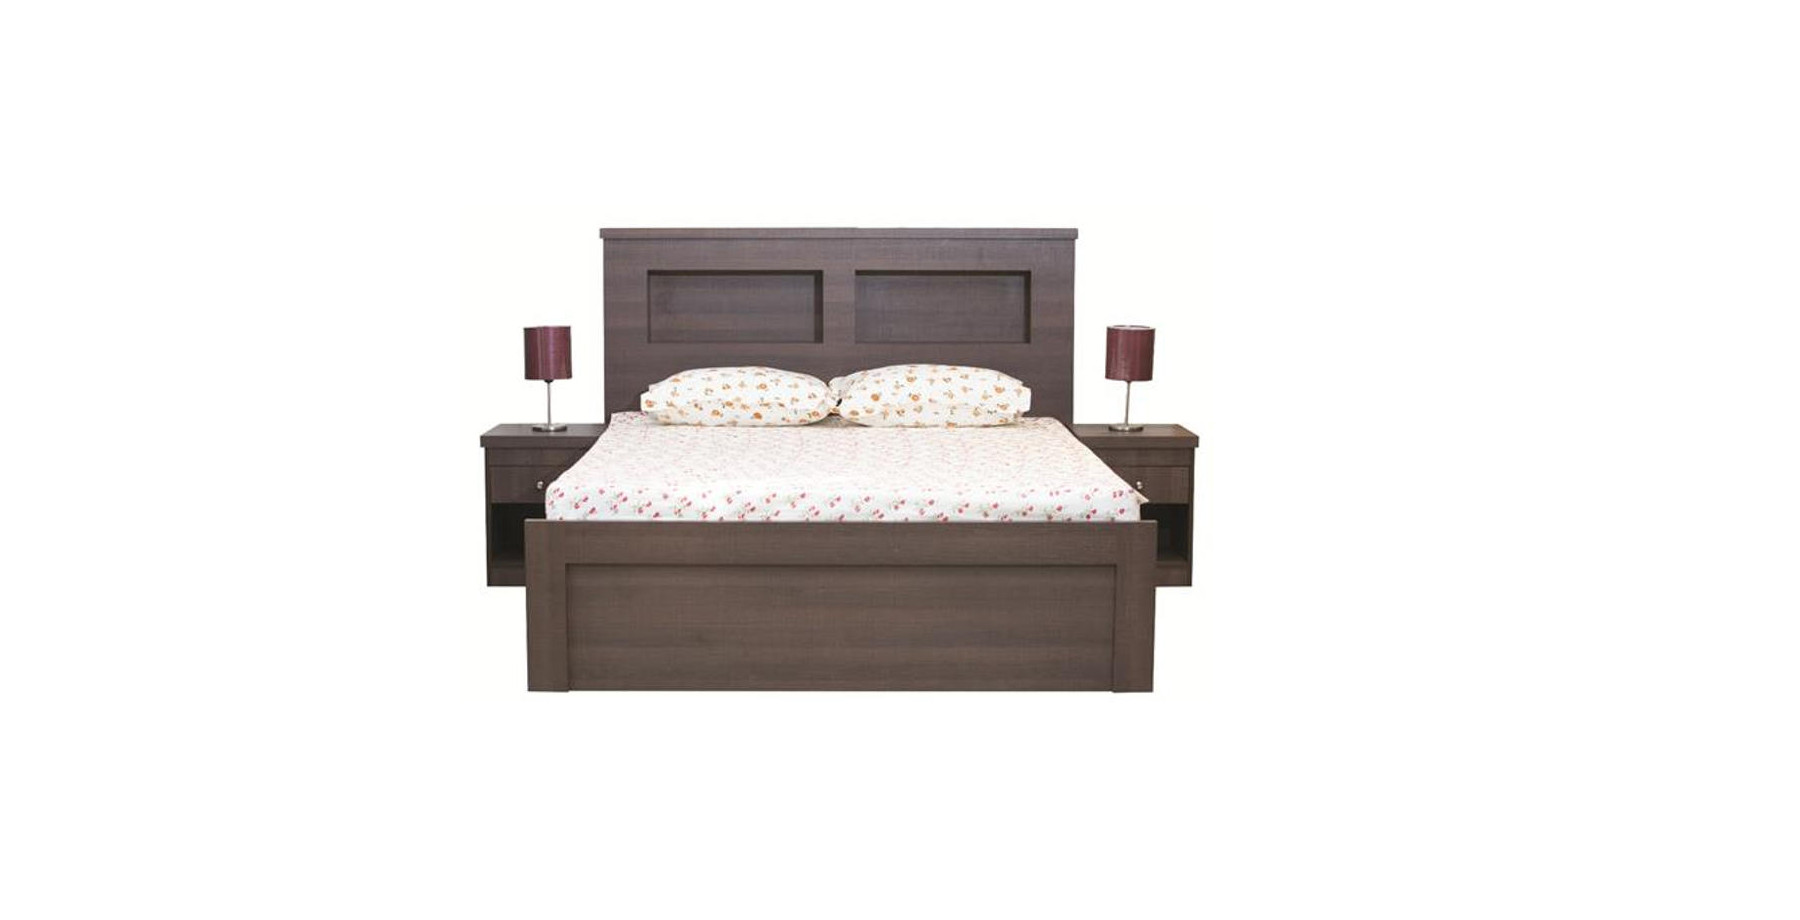 Cots and Mattresses in Bedroom Furniture at Indroyal